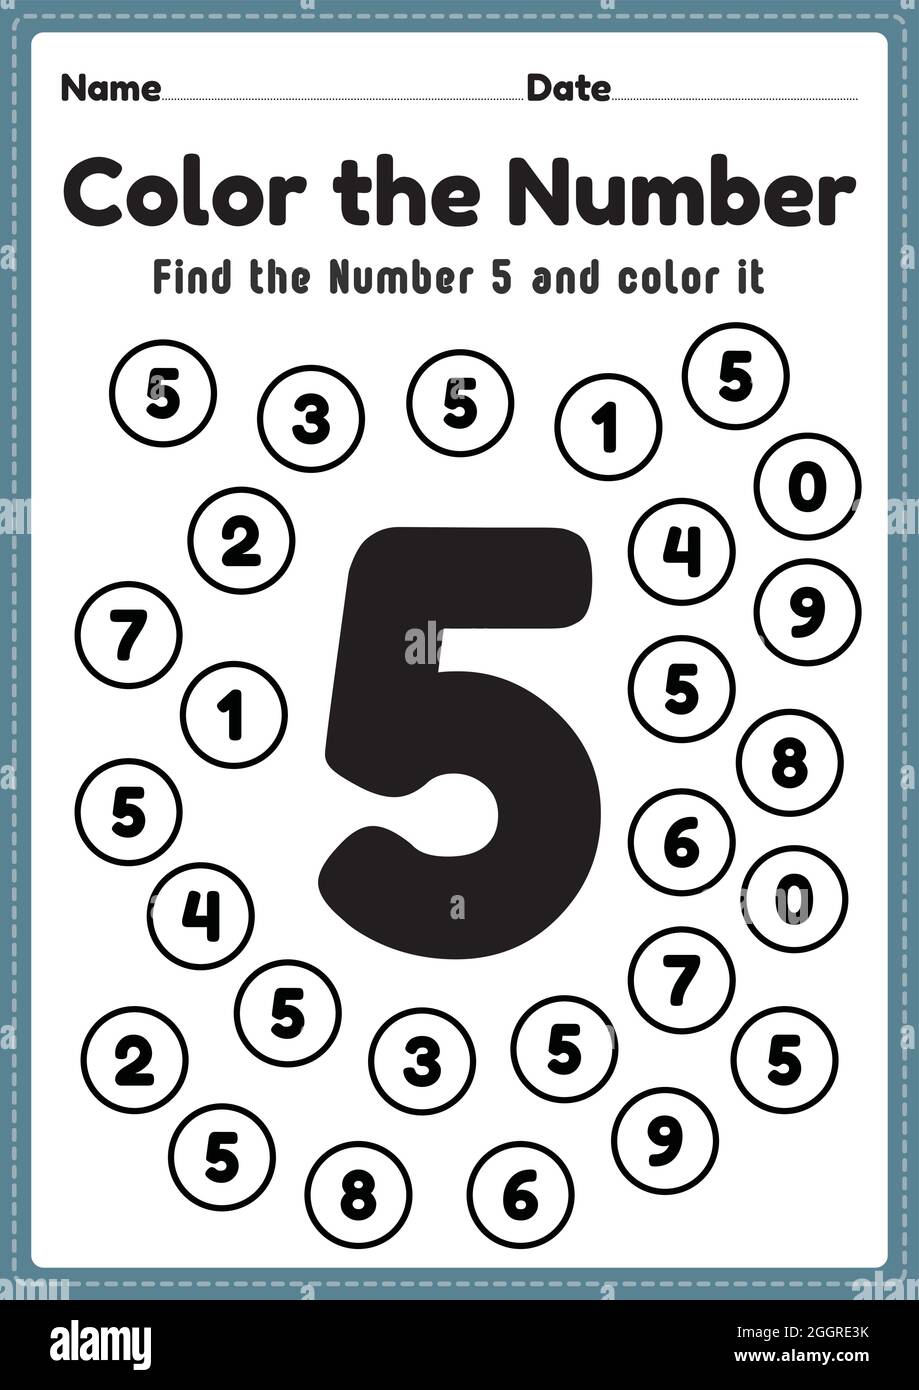 Preschool math worksheet, number 5 coloring maths activities for kindergarten kids to learn basic mathematics skills in a printable page. Stock Vector